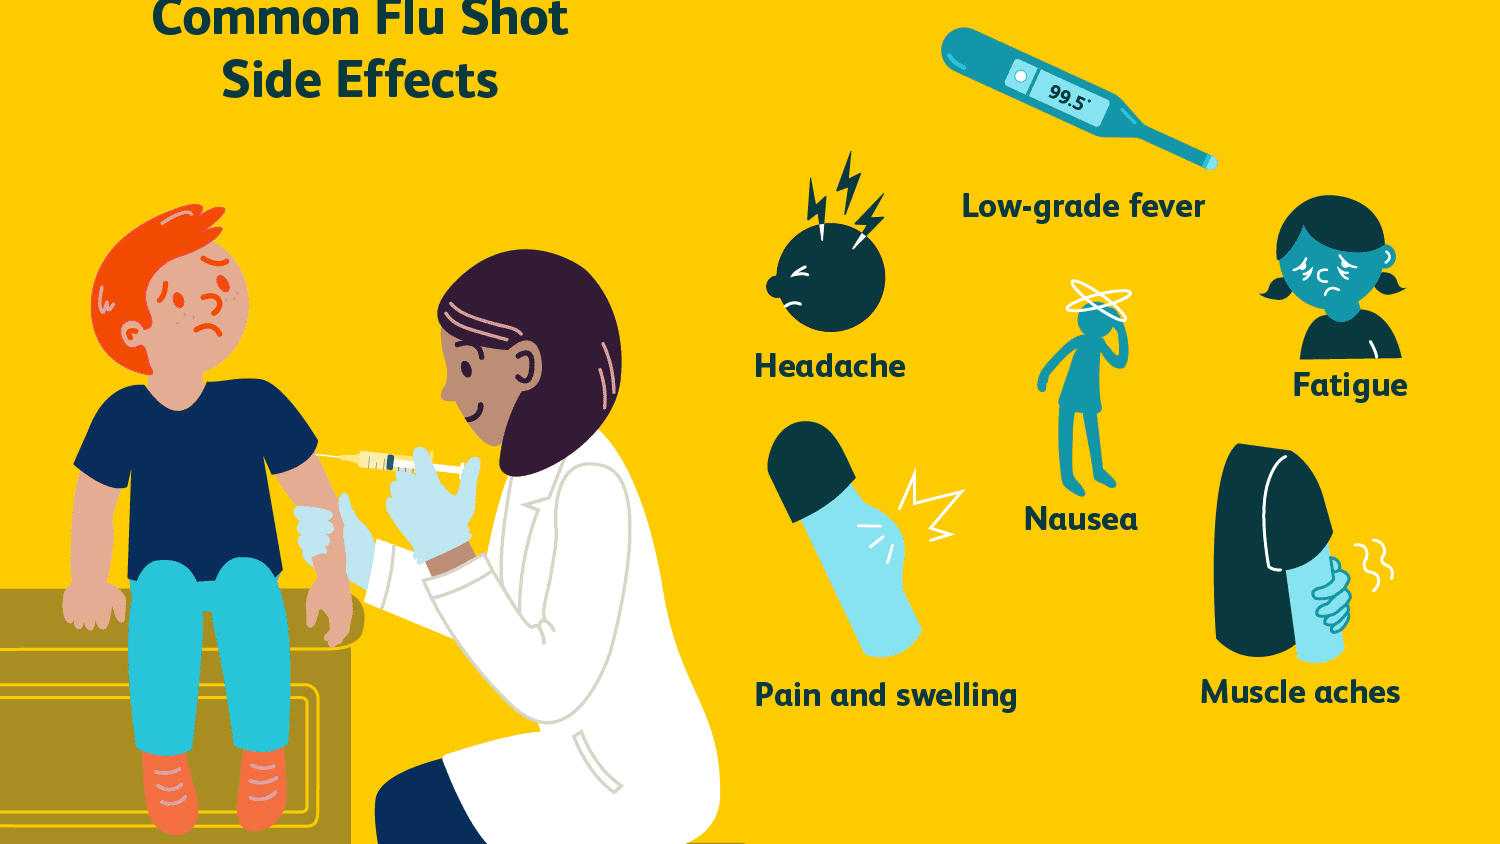 Be careful with these influenza side effects